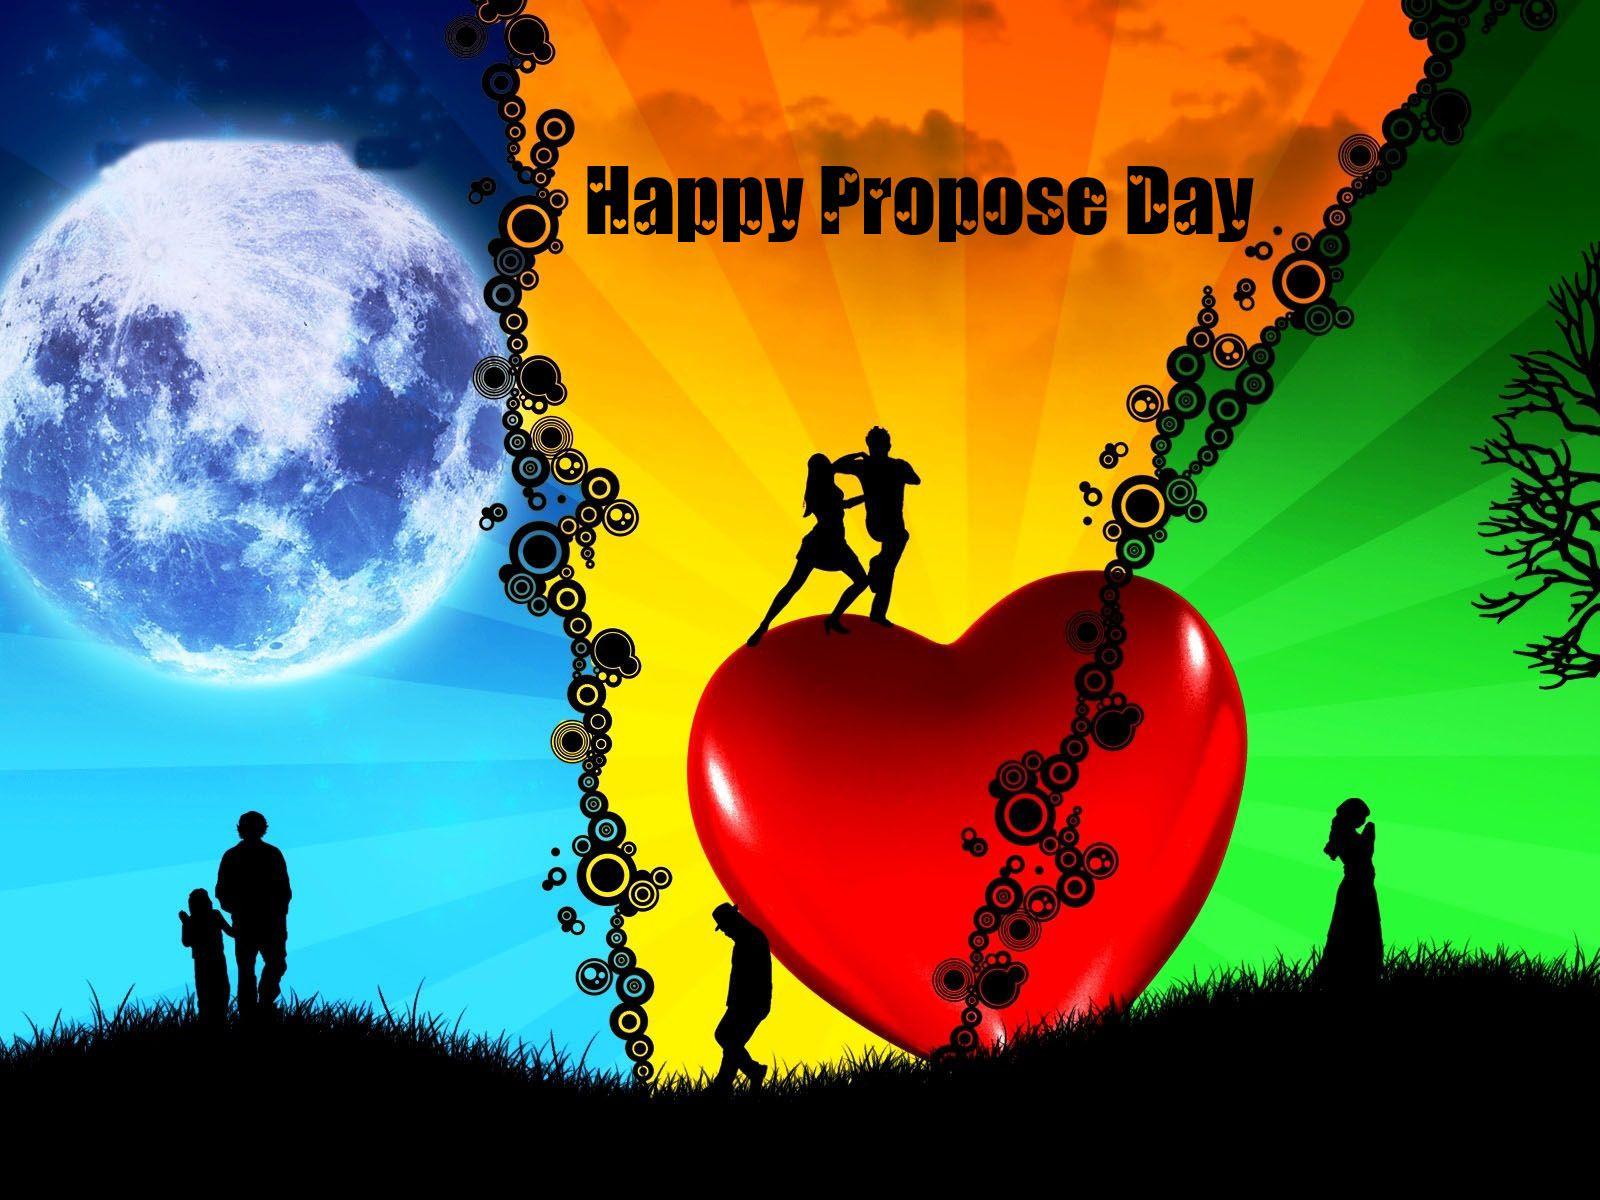 Propose Day Image Wall Papers Pics Picture Photo for Whatsapp